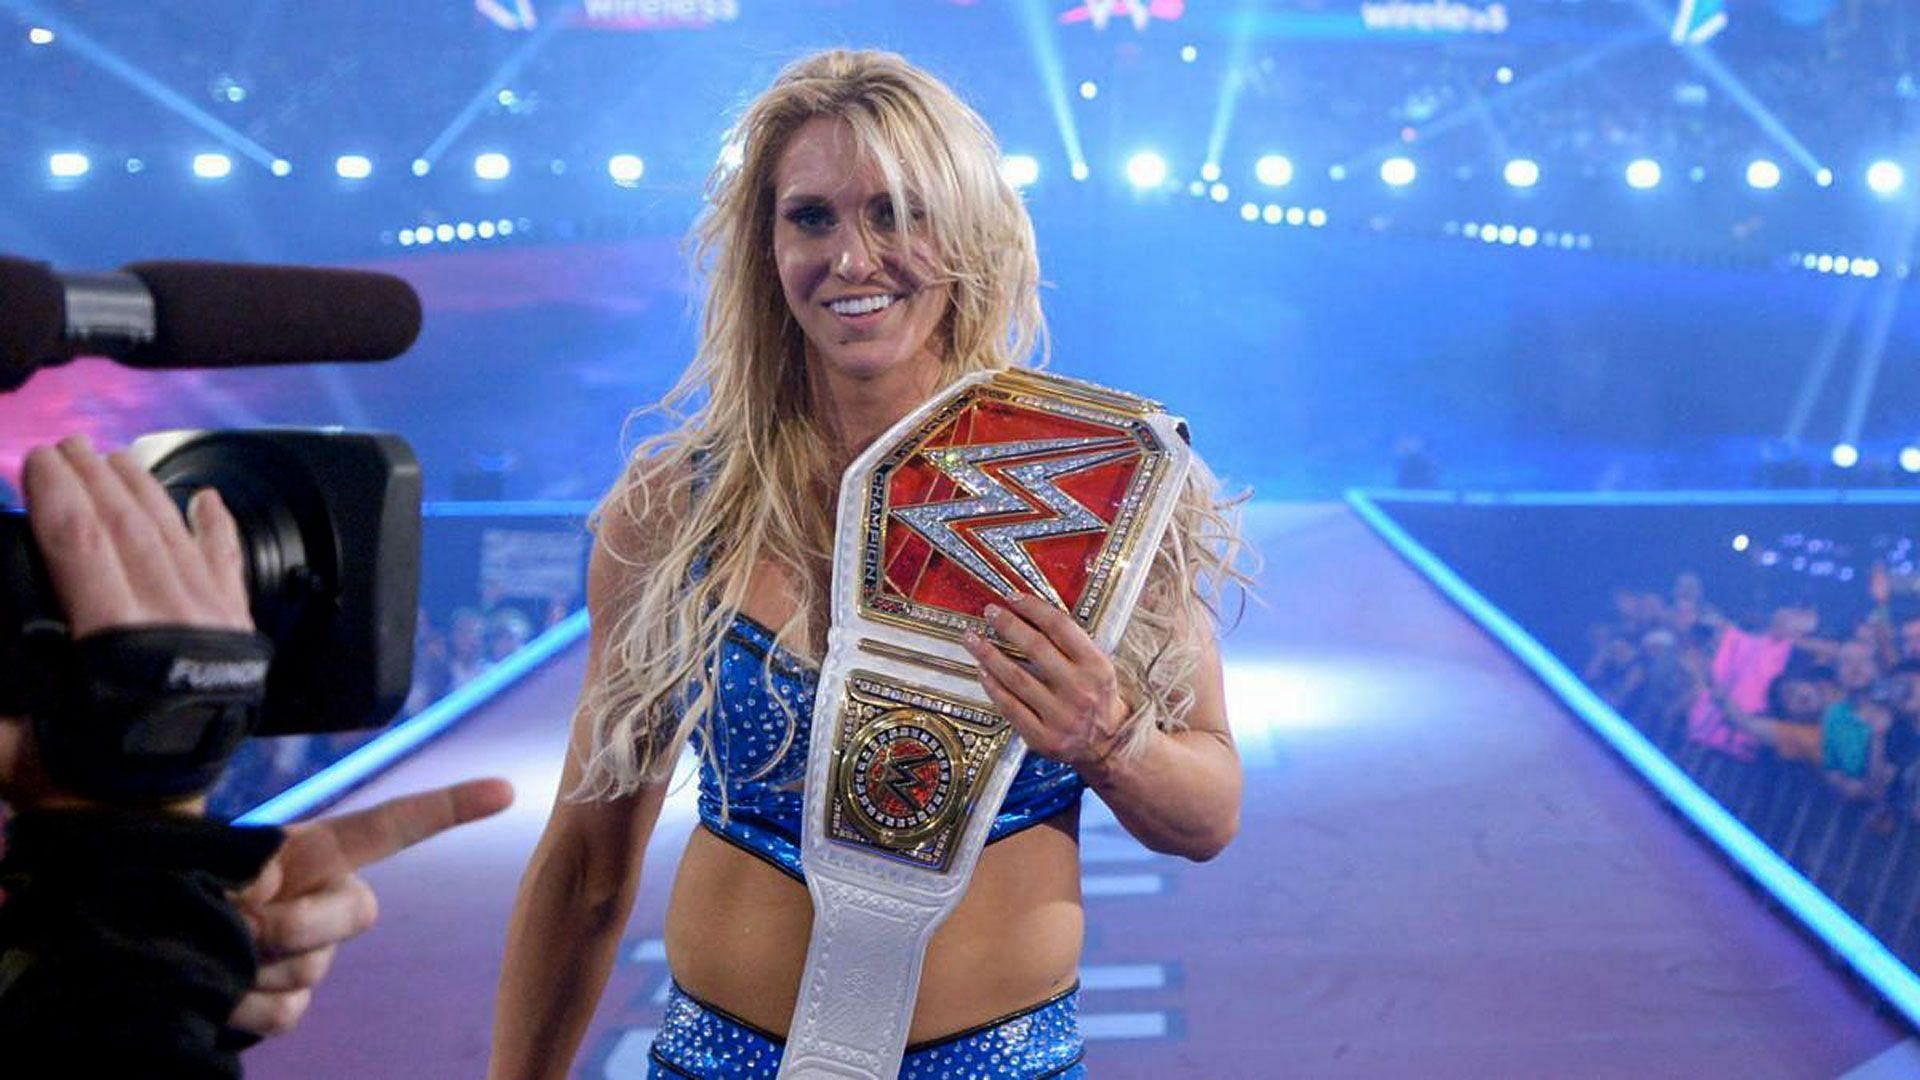 WWE Charlotte Flair Wallpapers  Wallpaper Cave